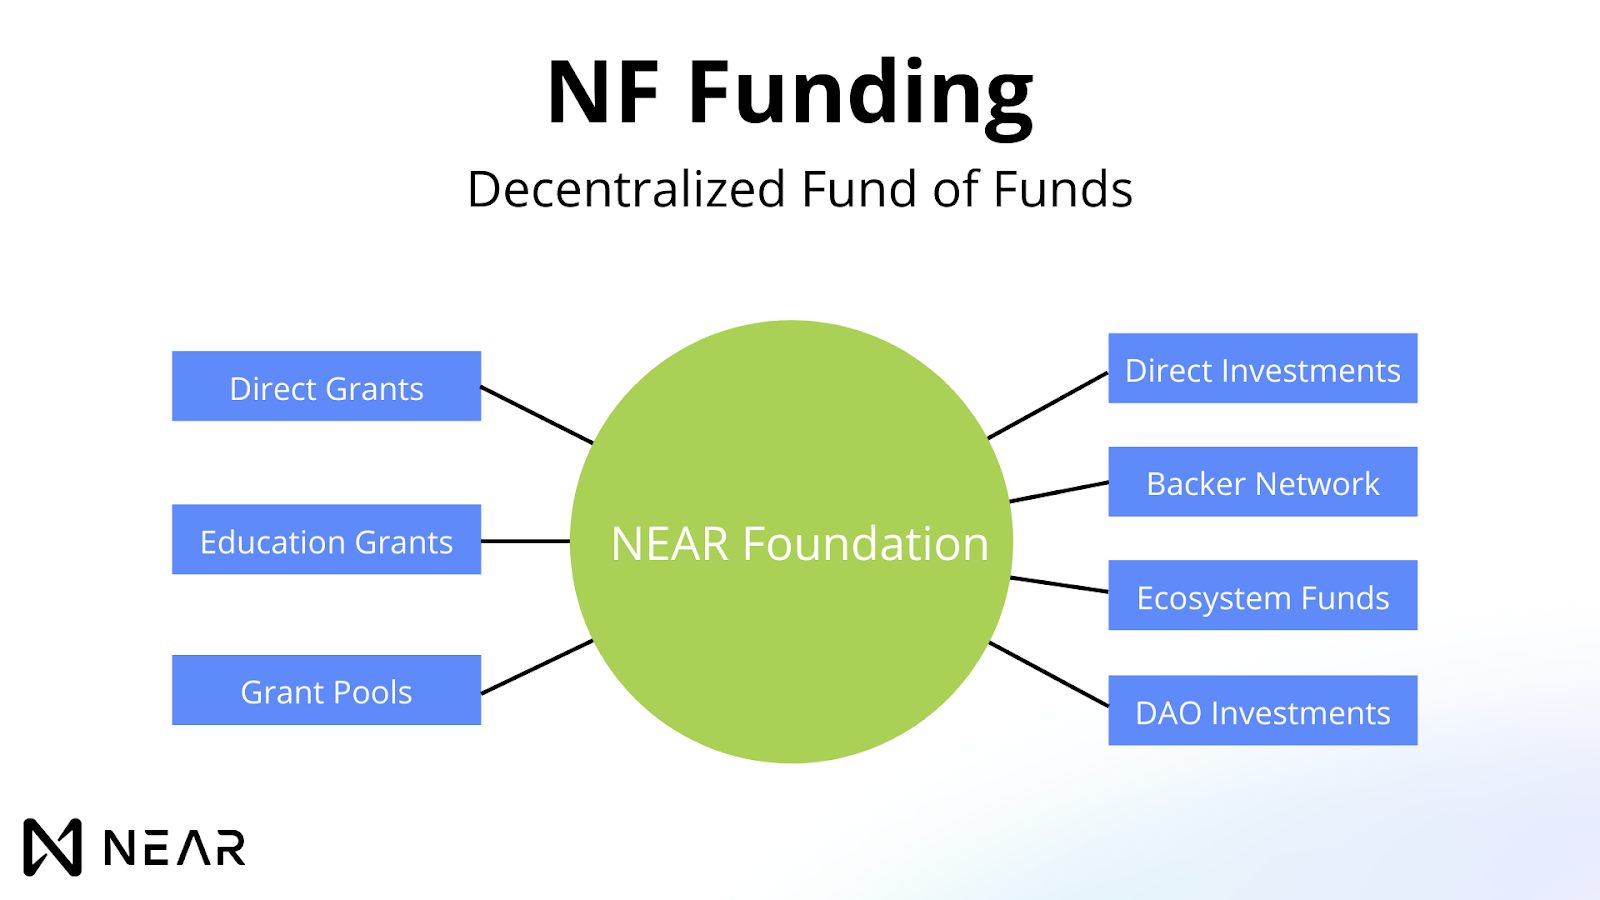 NF Funding Image